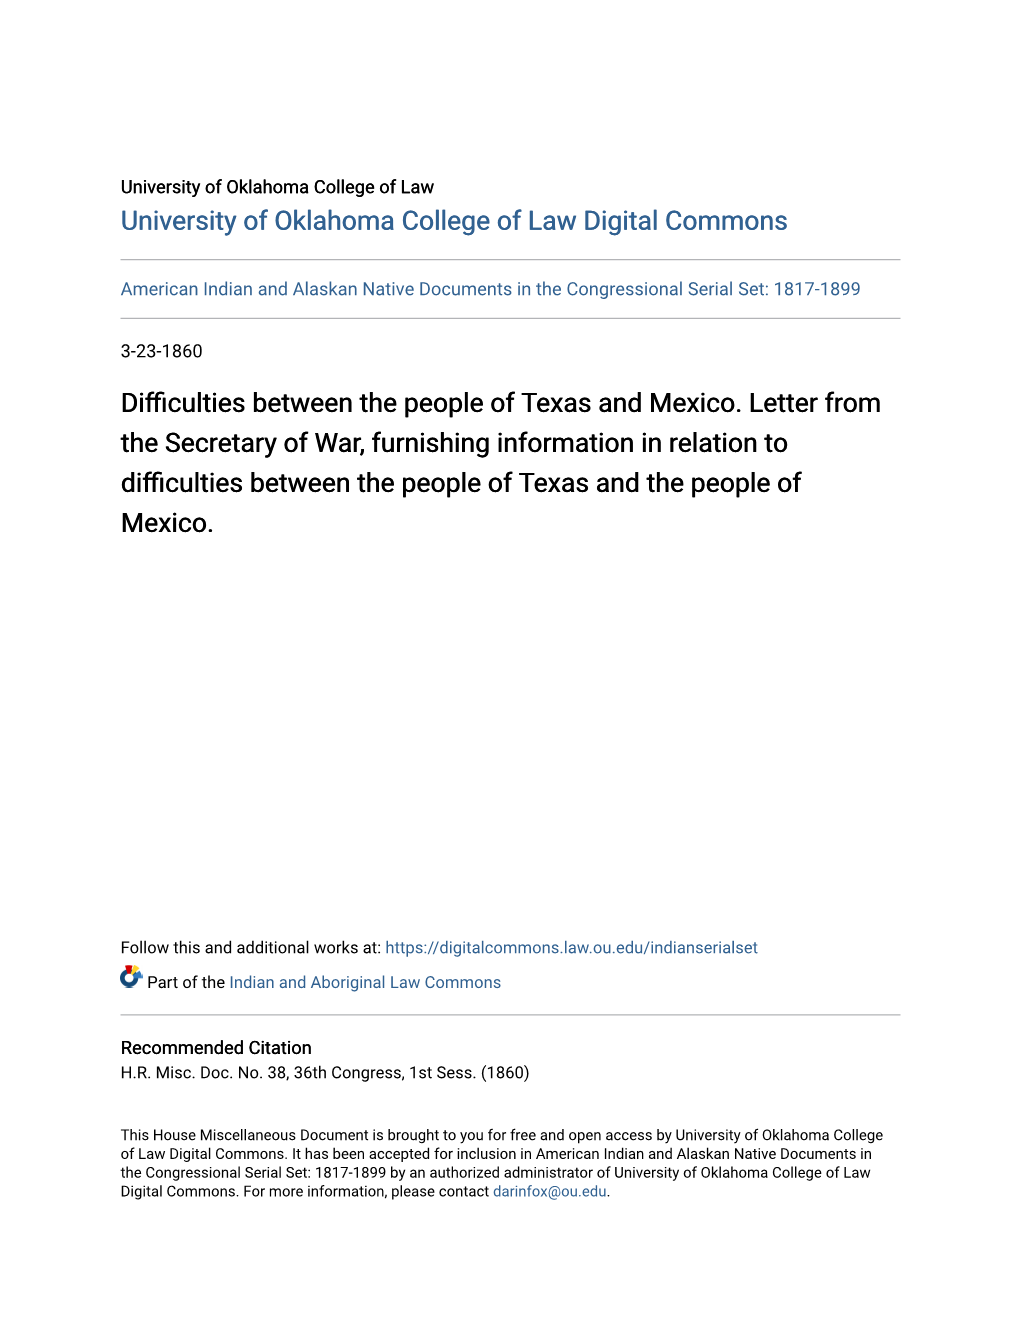 Difficulties Between the People of Texas and Mexico. Letter from the Secretary of War, Furnishing Information in Relation To